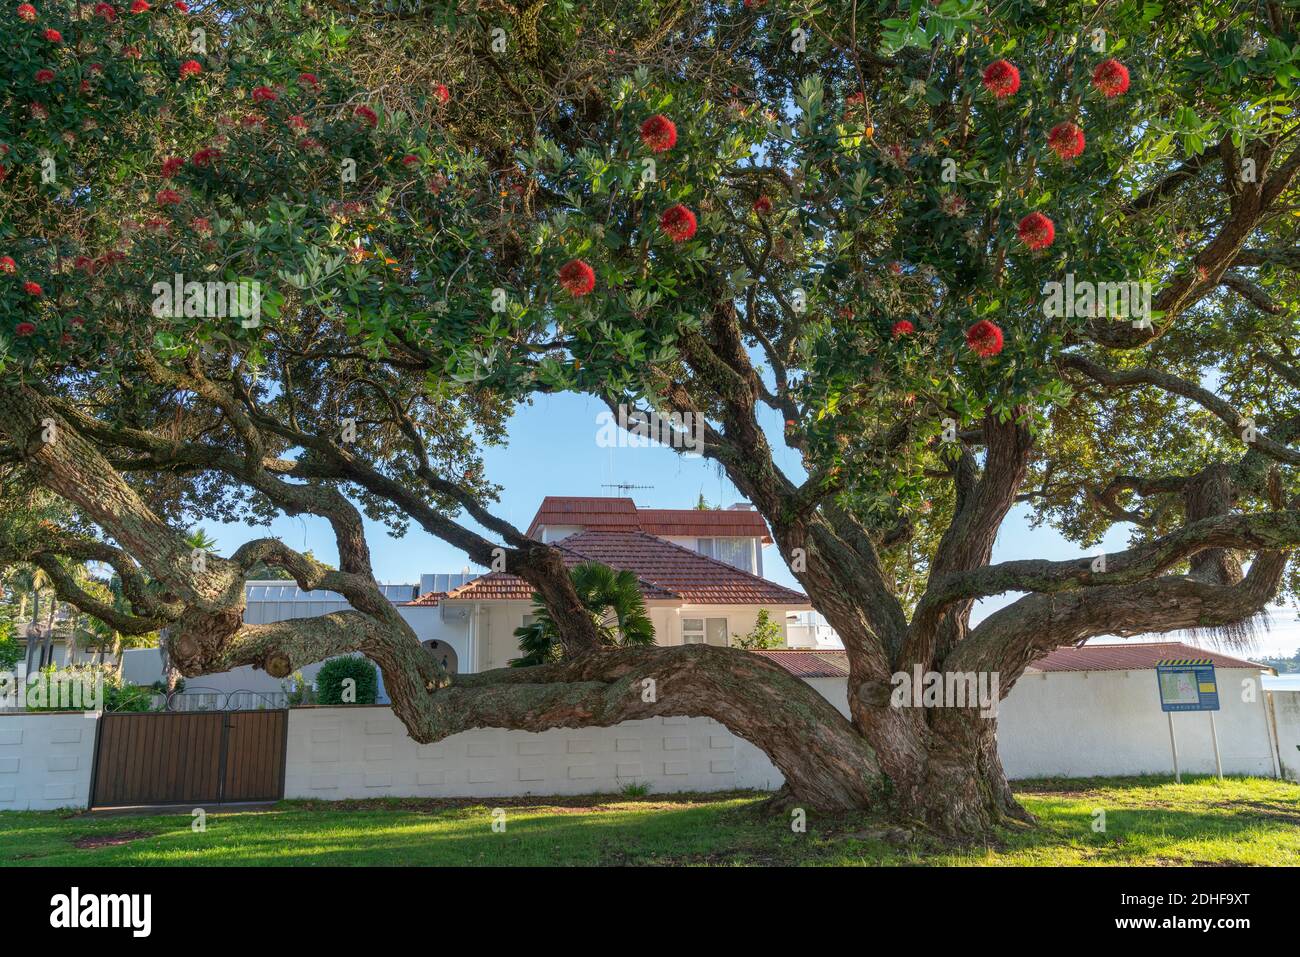 Beautiful large pohutukawa tree in bloom with it's characteristic red flowers in coastal suburban street Stock Photo